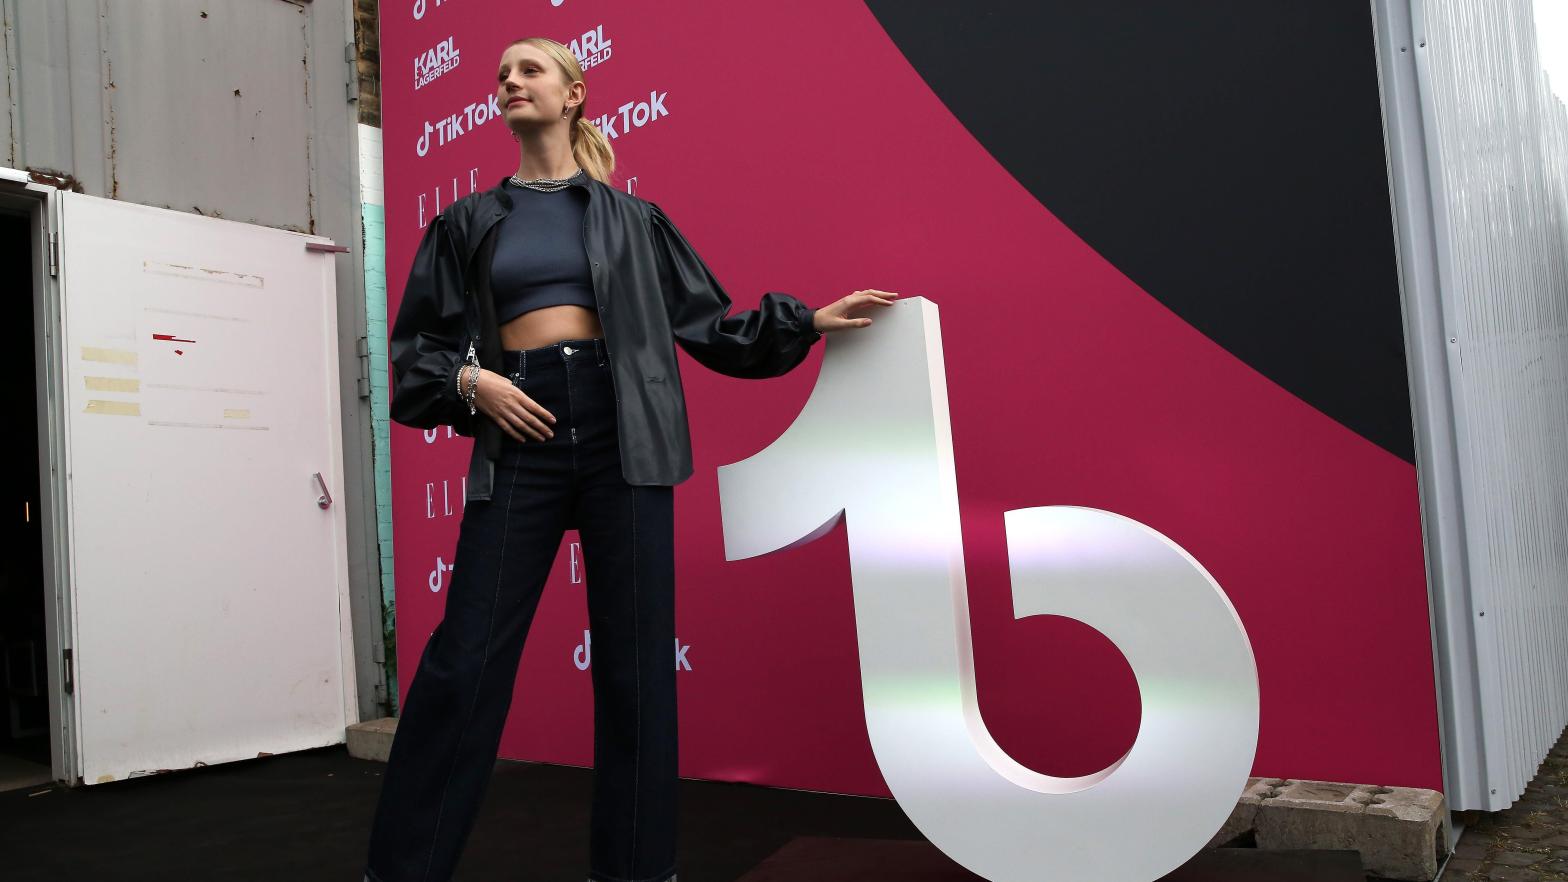 Fashion model Trixi Giese poses with the logo of TikTok at a recent fashion show in Germany. The social media company has come under fire for the data it supposedly collects on its users. (Photo: Adam Berry, Getty Images)